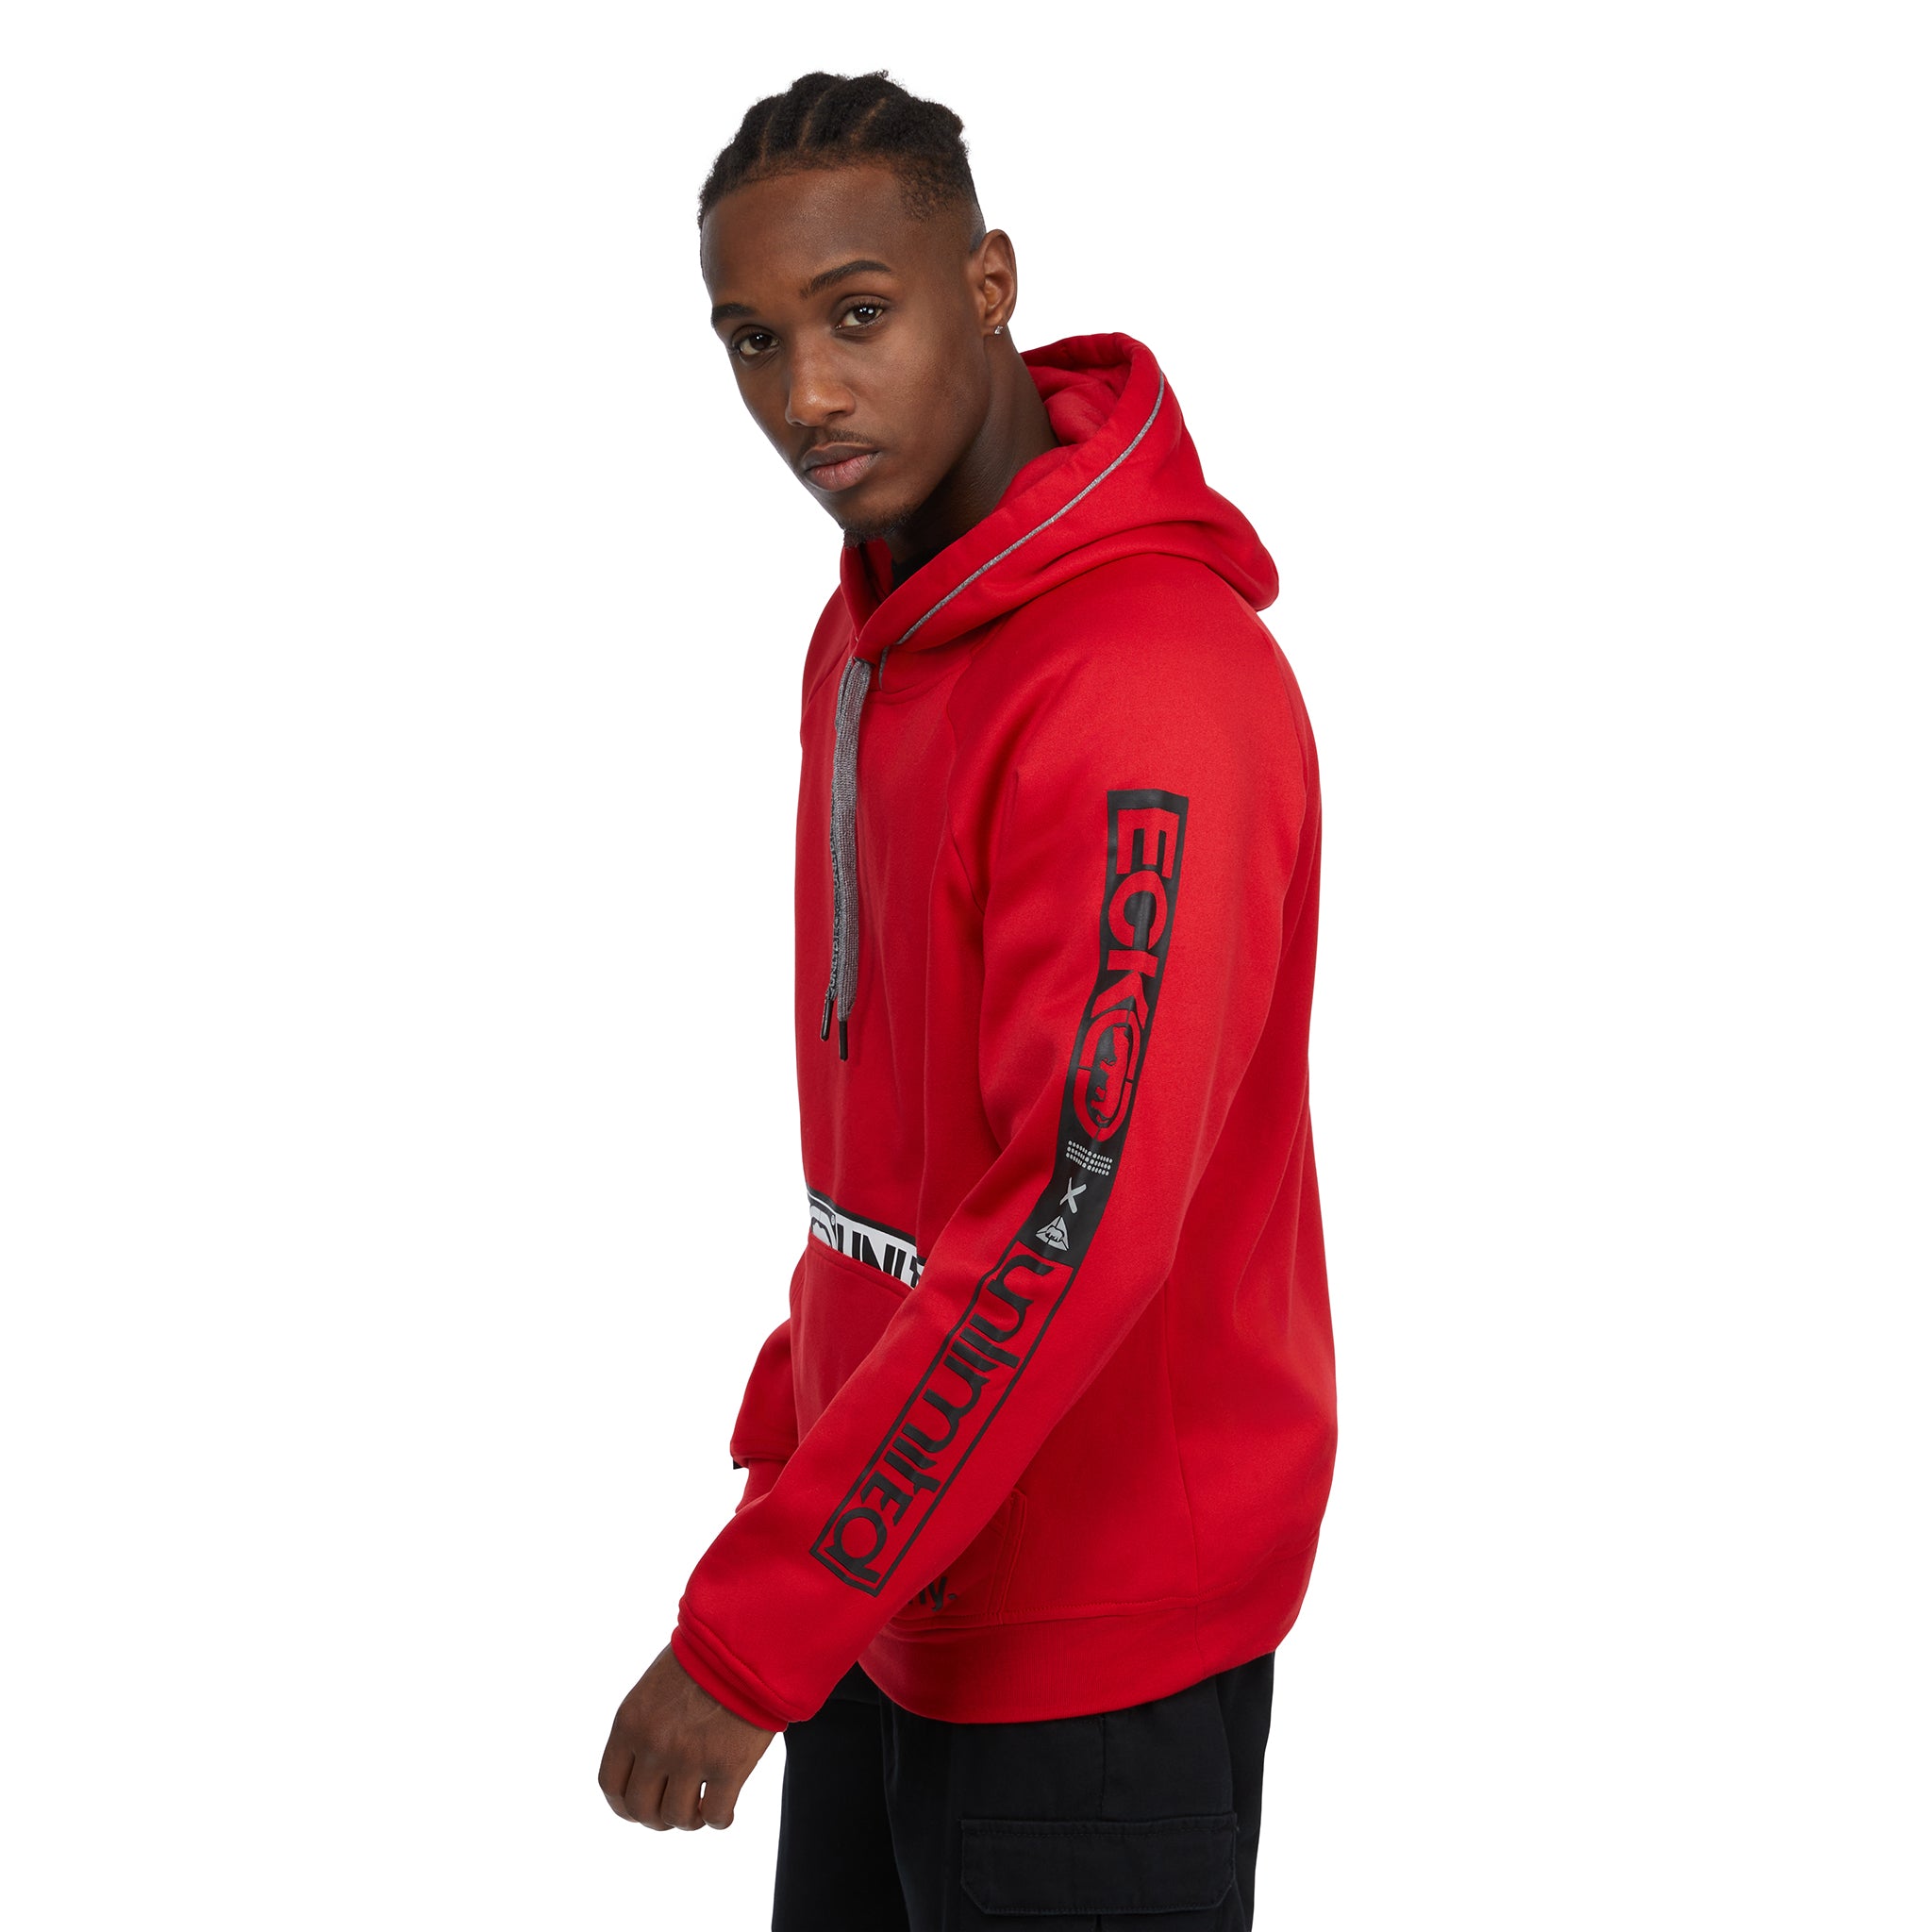 Divested Pullover Hoodie